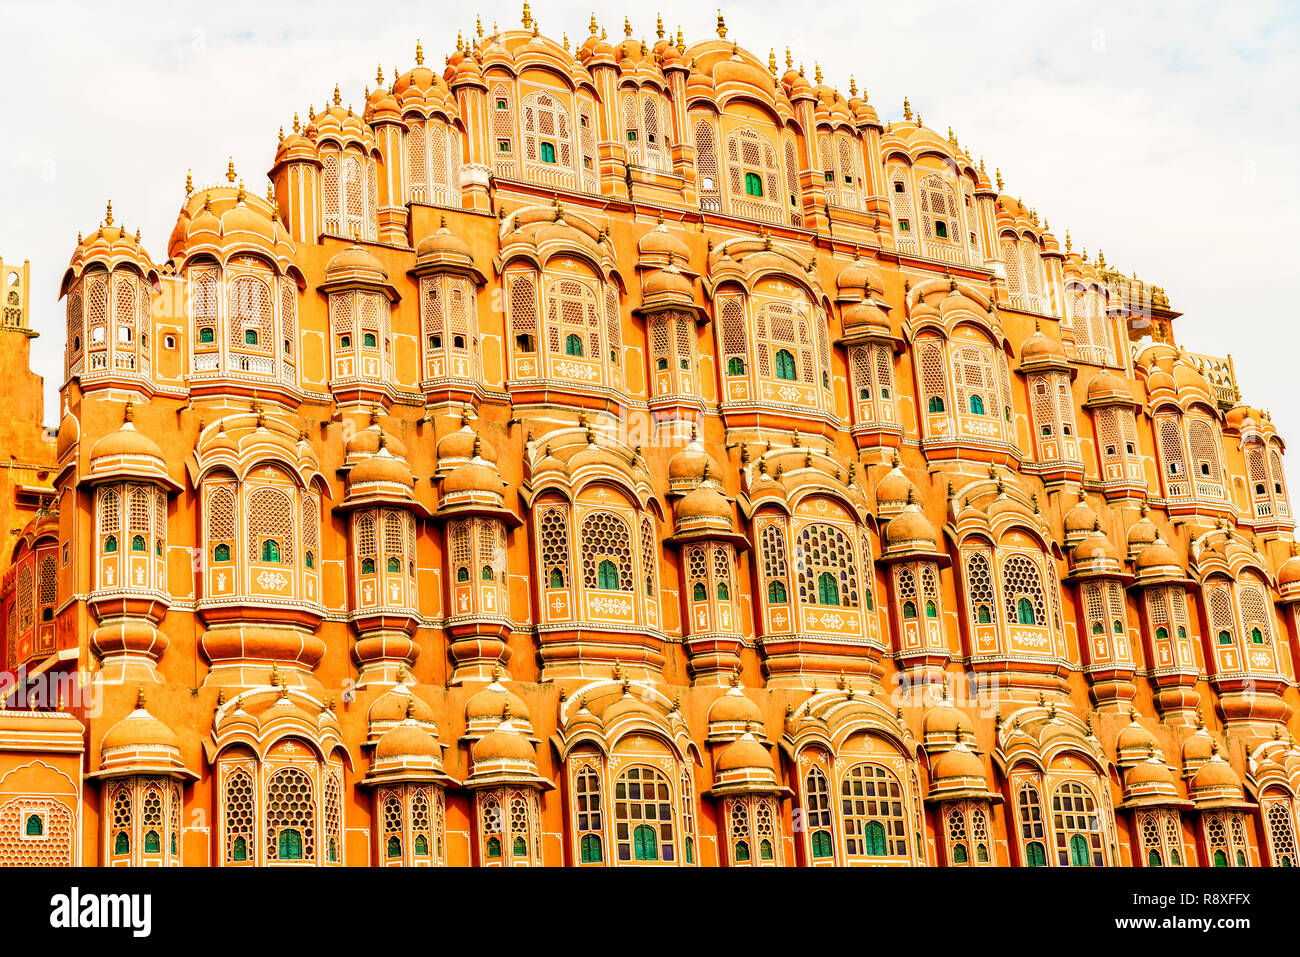 Hawa Mahal (The Palace of Winds) in Jaipur, Northern India Stock Photo